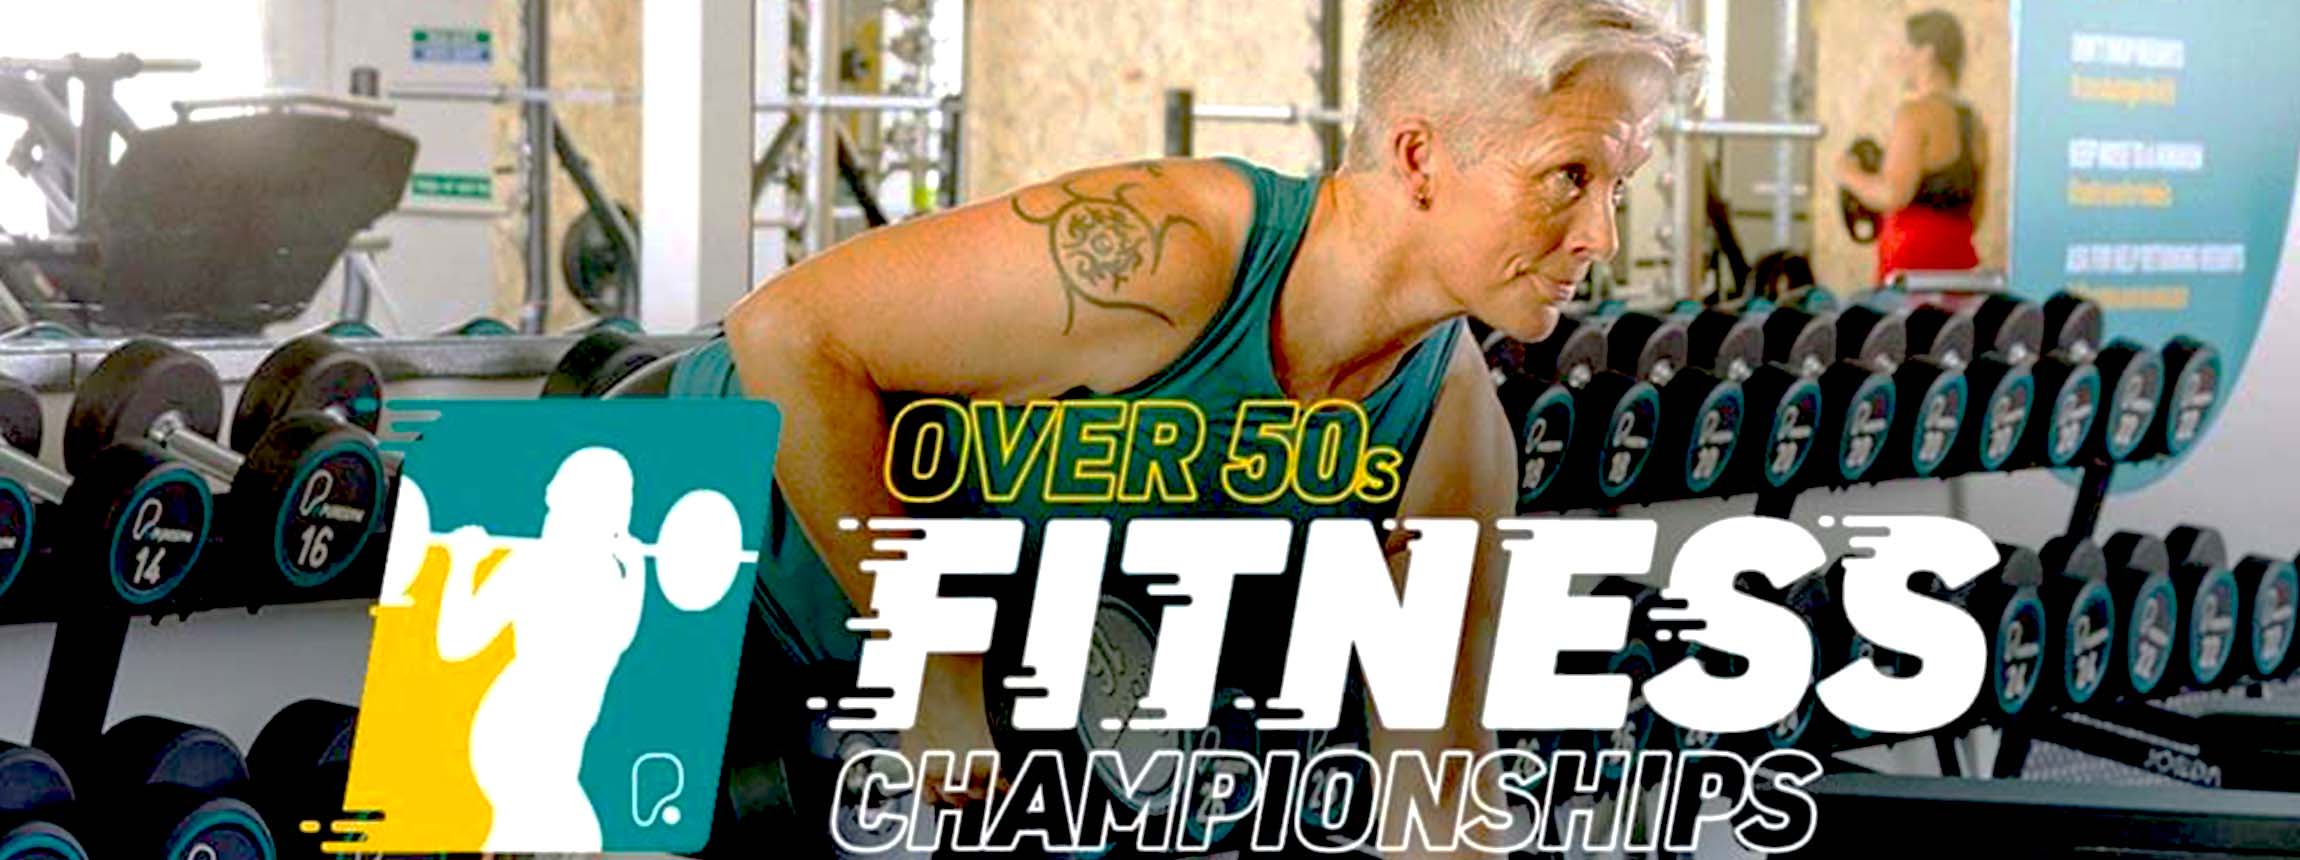 Over 50s fitness championships